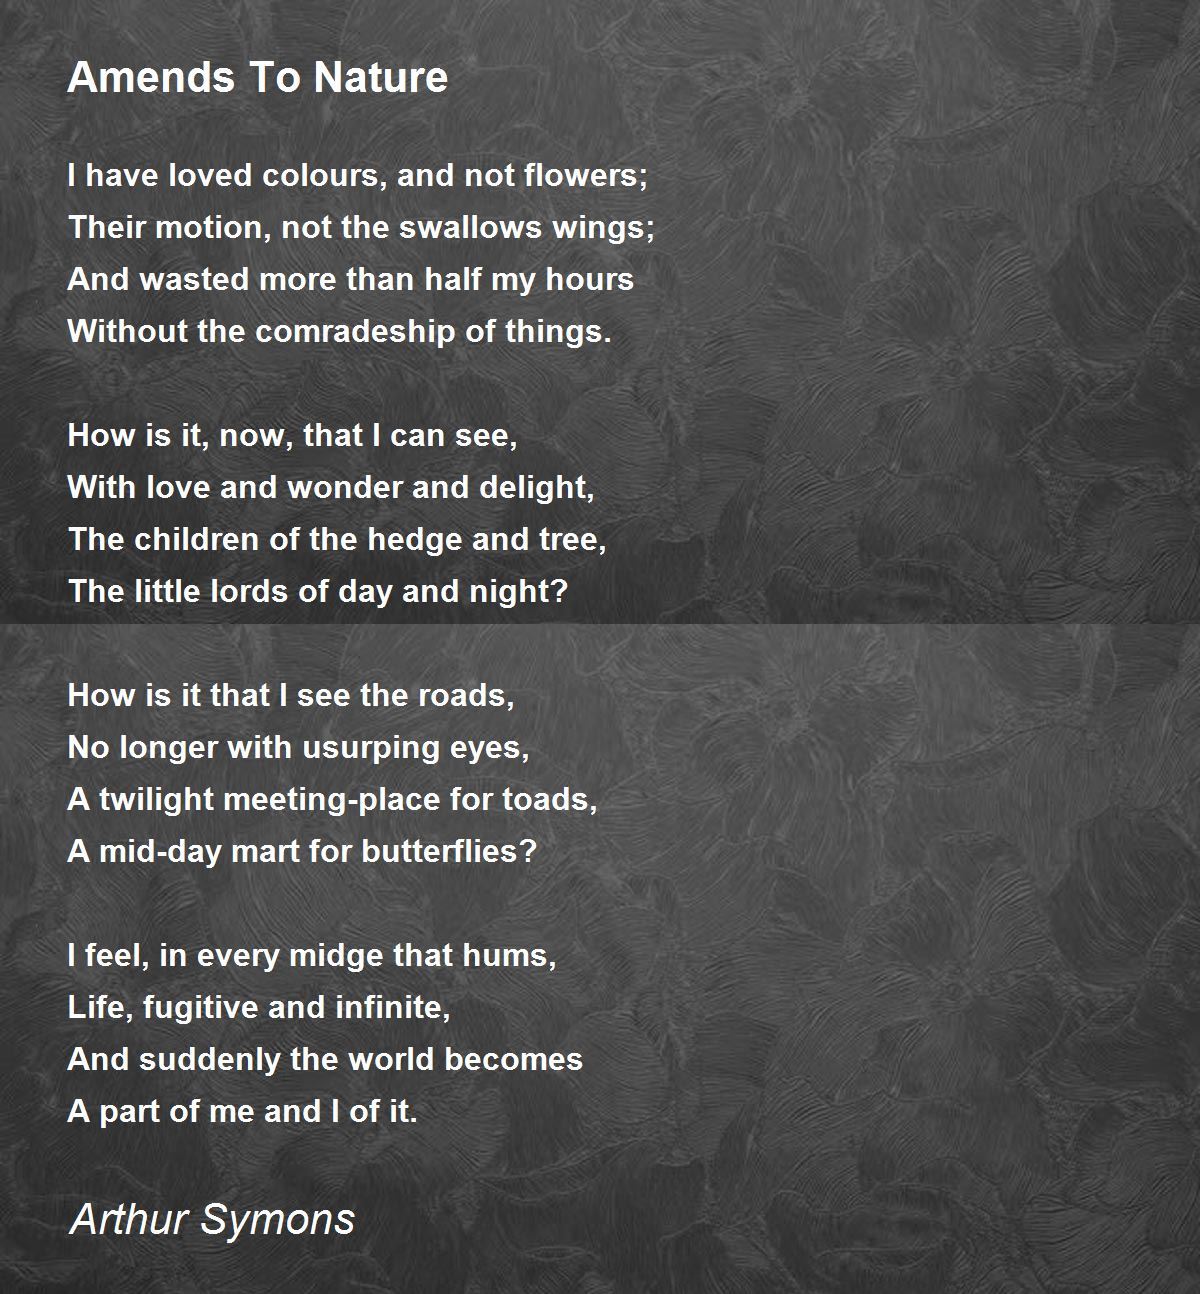 Amends To Nature Arthur Symons - Amends To Nature Poem